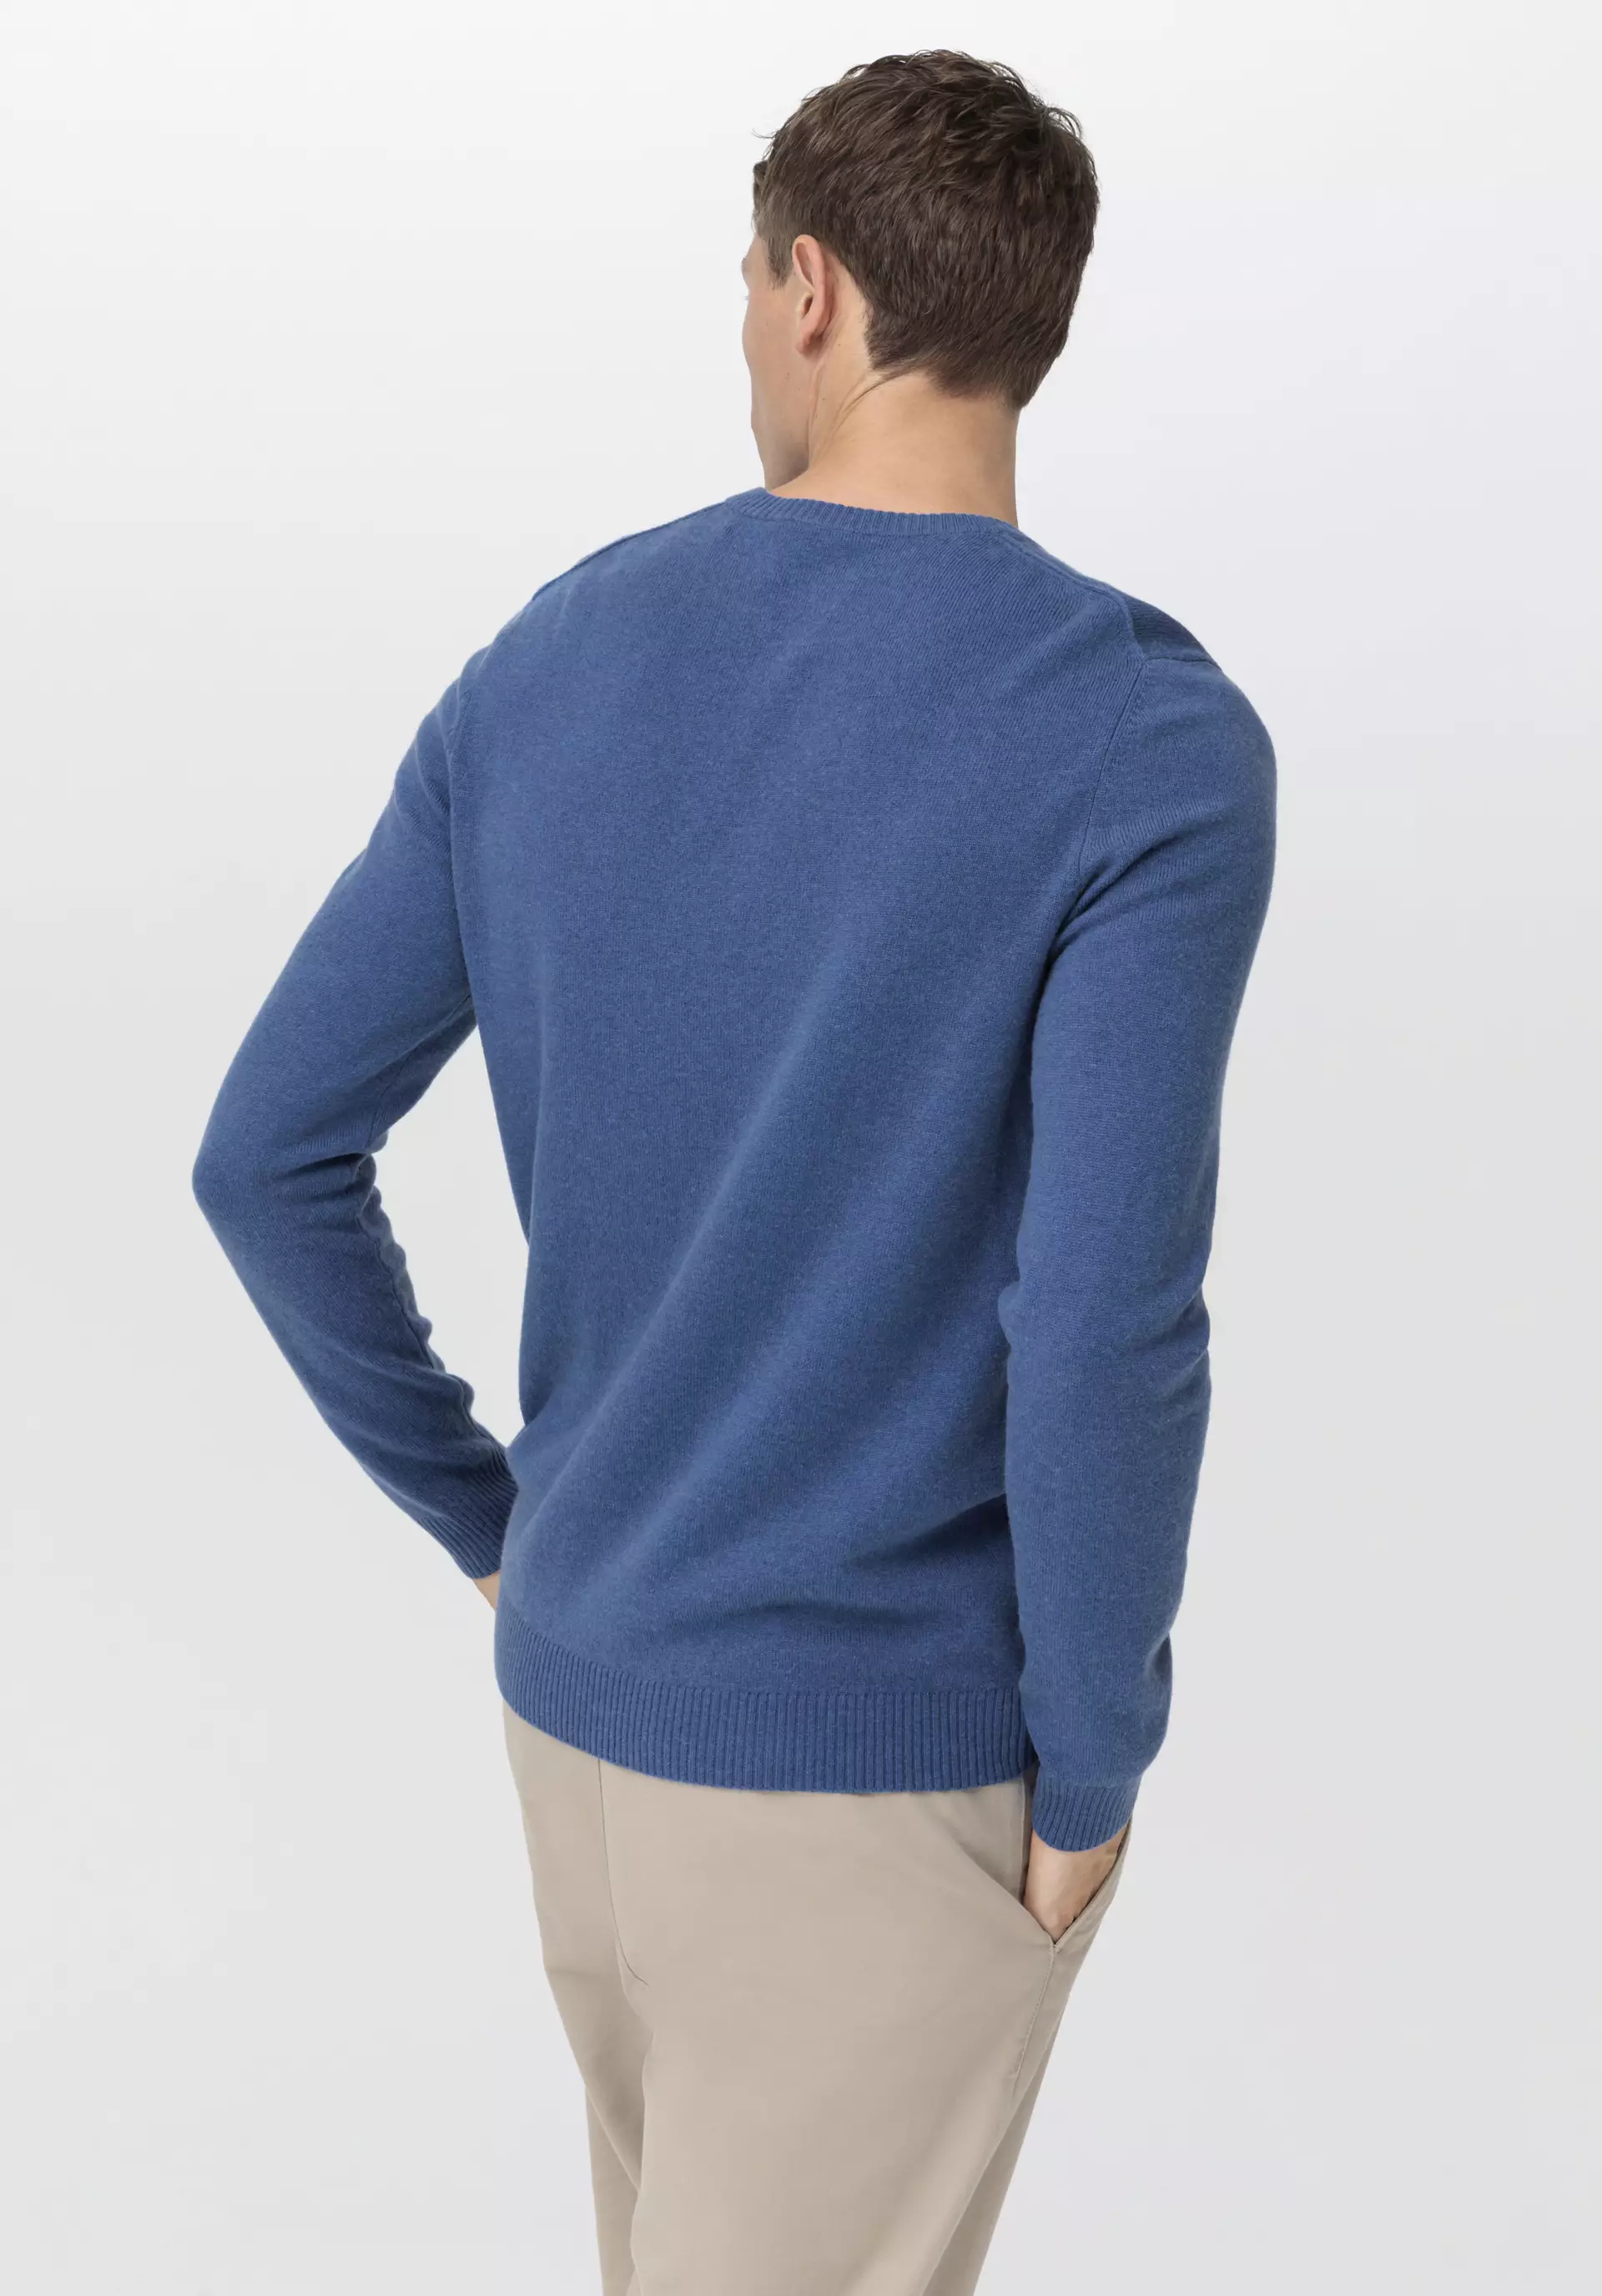 V-neck sweater made of virgin wool with cashmere - 1